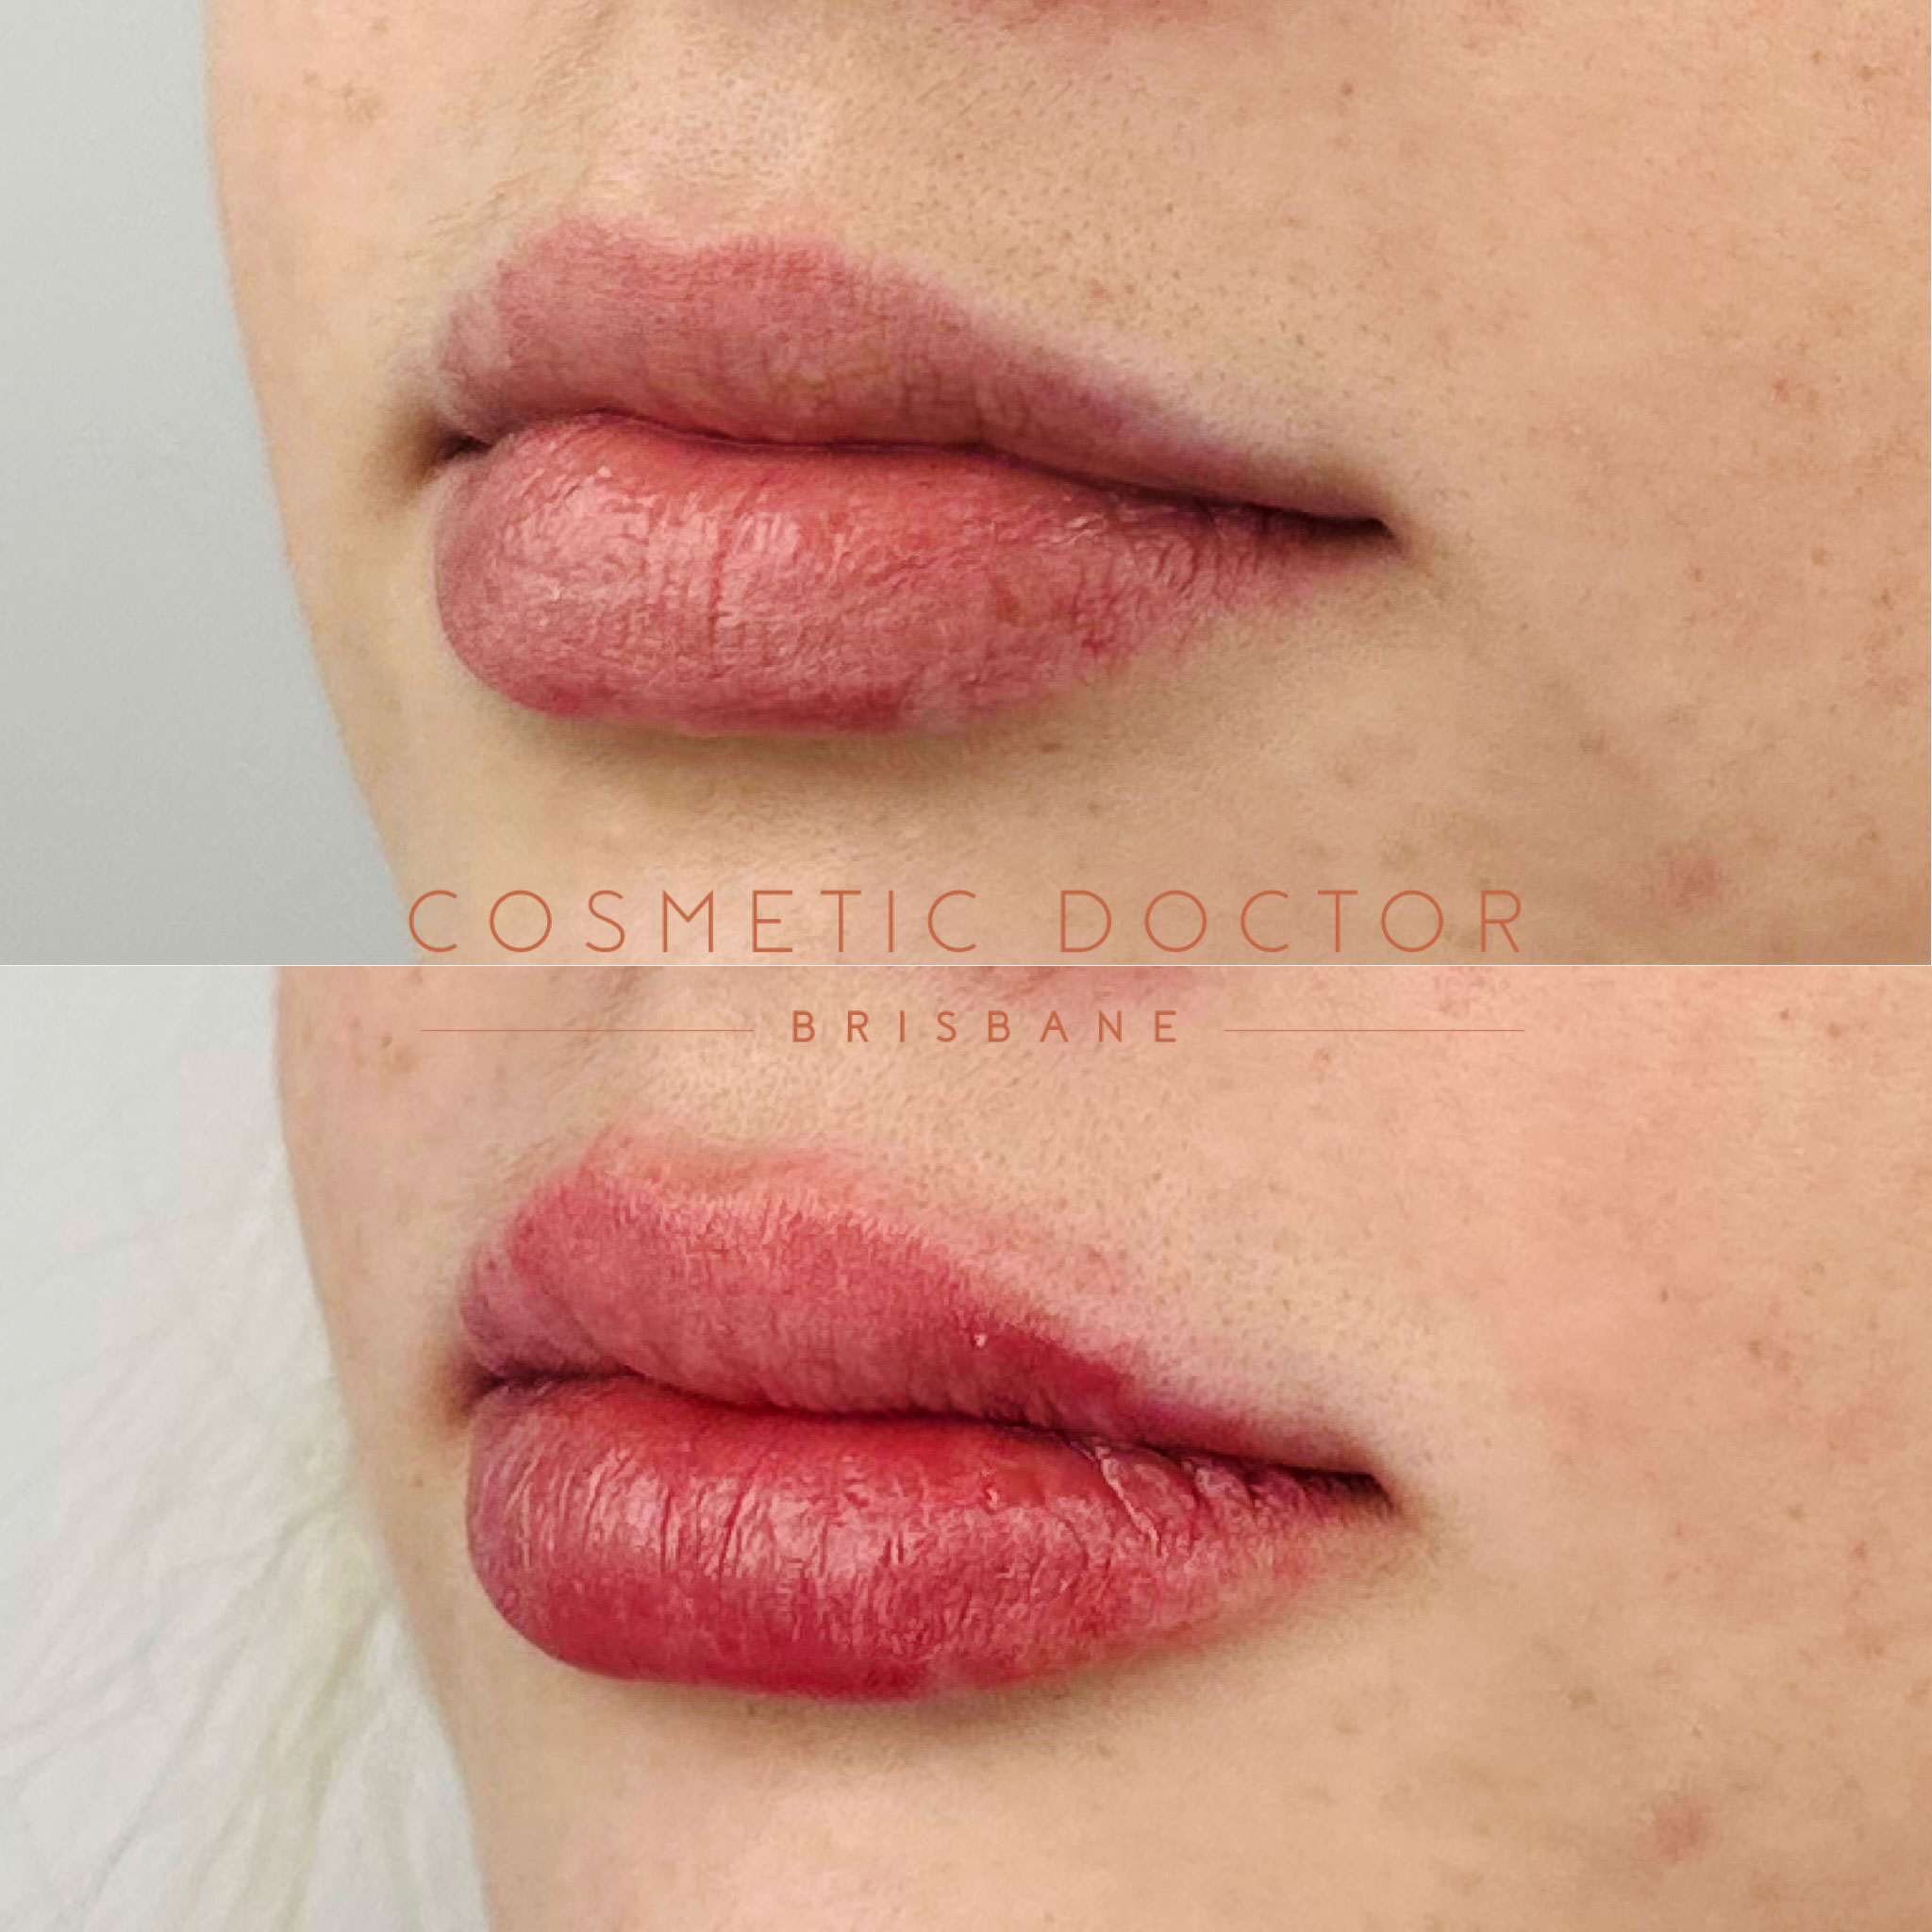 Before and after of dermal lip filler performed by Dr Tarek Shalabi at cosmetic doctor brisbane